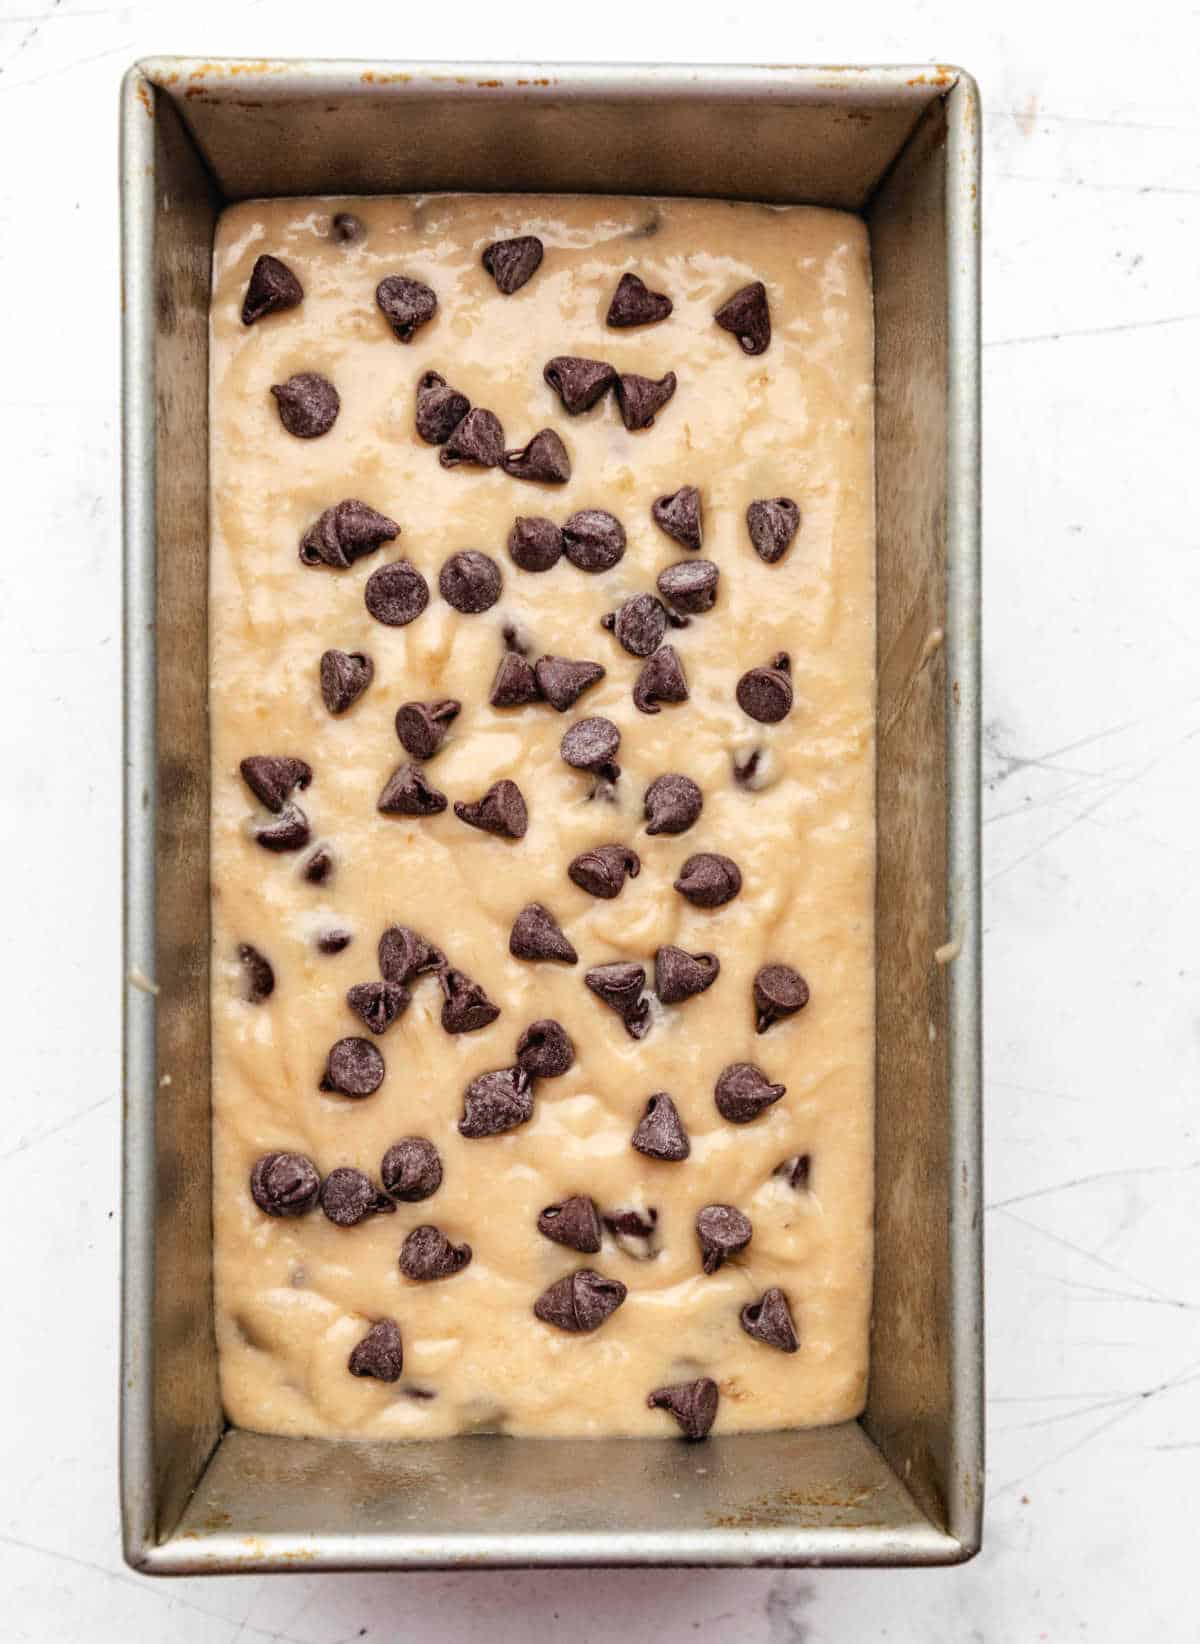 Chocolate chip banana bread batter topped with chocolate chips in a loaf pan.